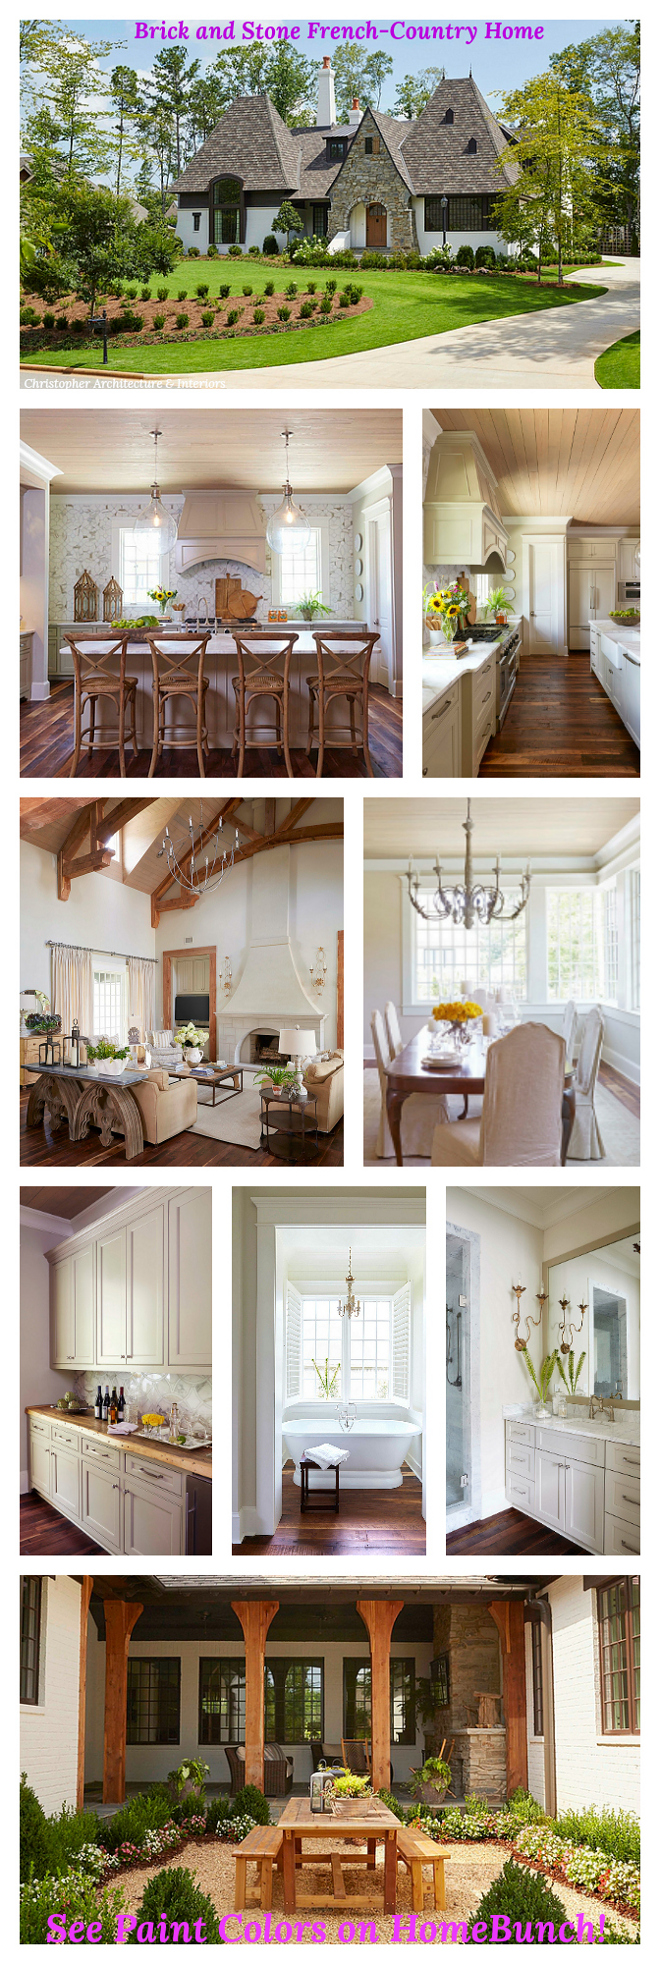 Brick and Stone French-Country Home See Paint Colors and other sources on Home Bunch